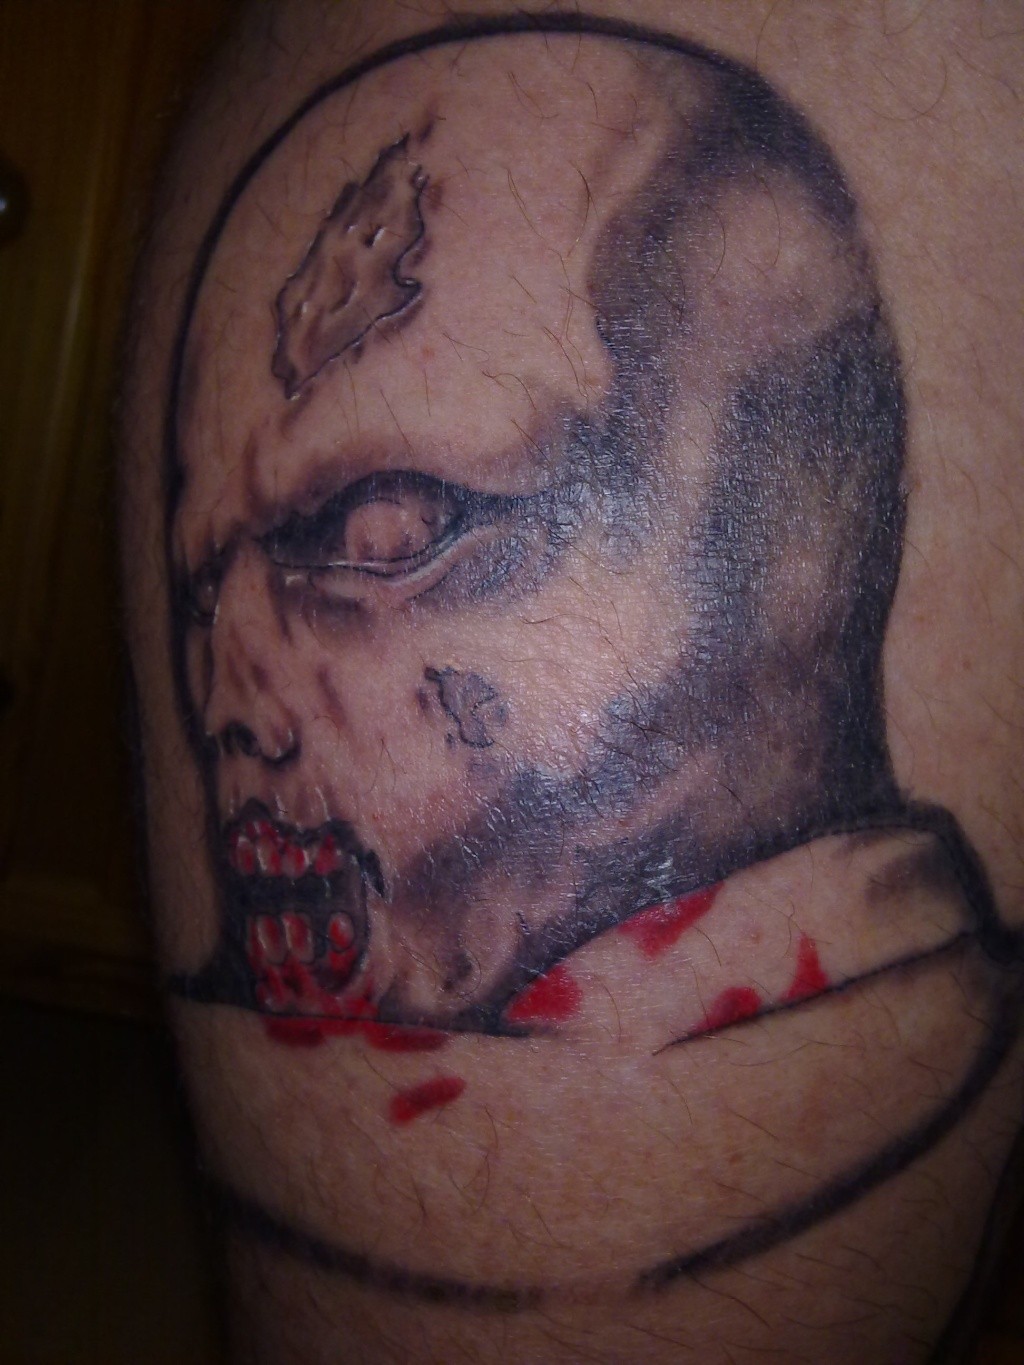 Resident Evil Tattoos - Page 4 23062011